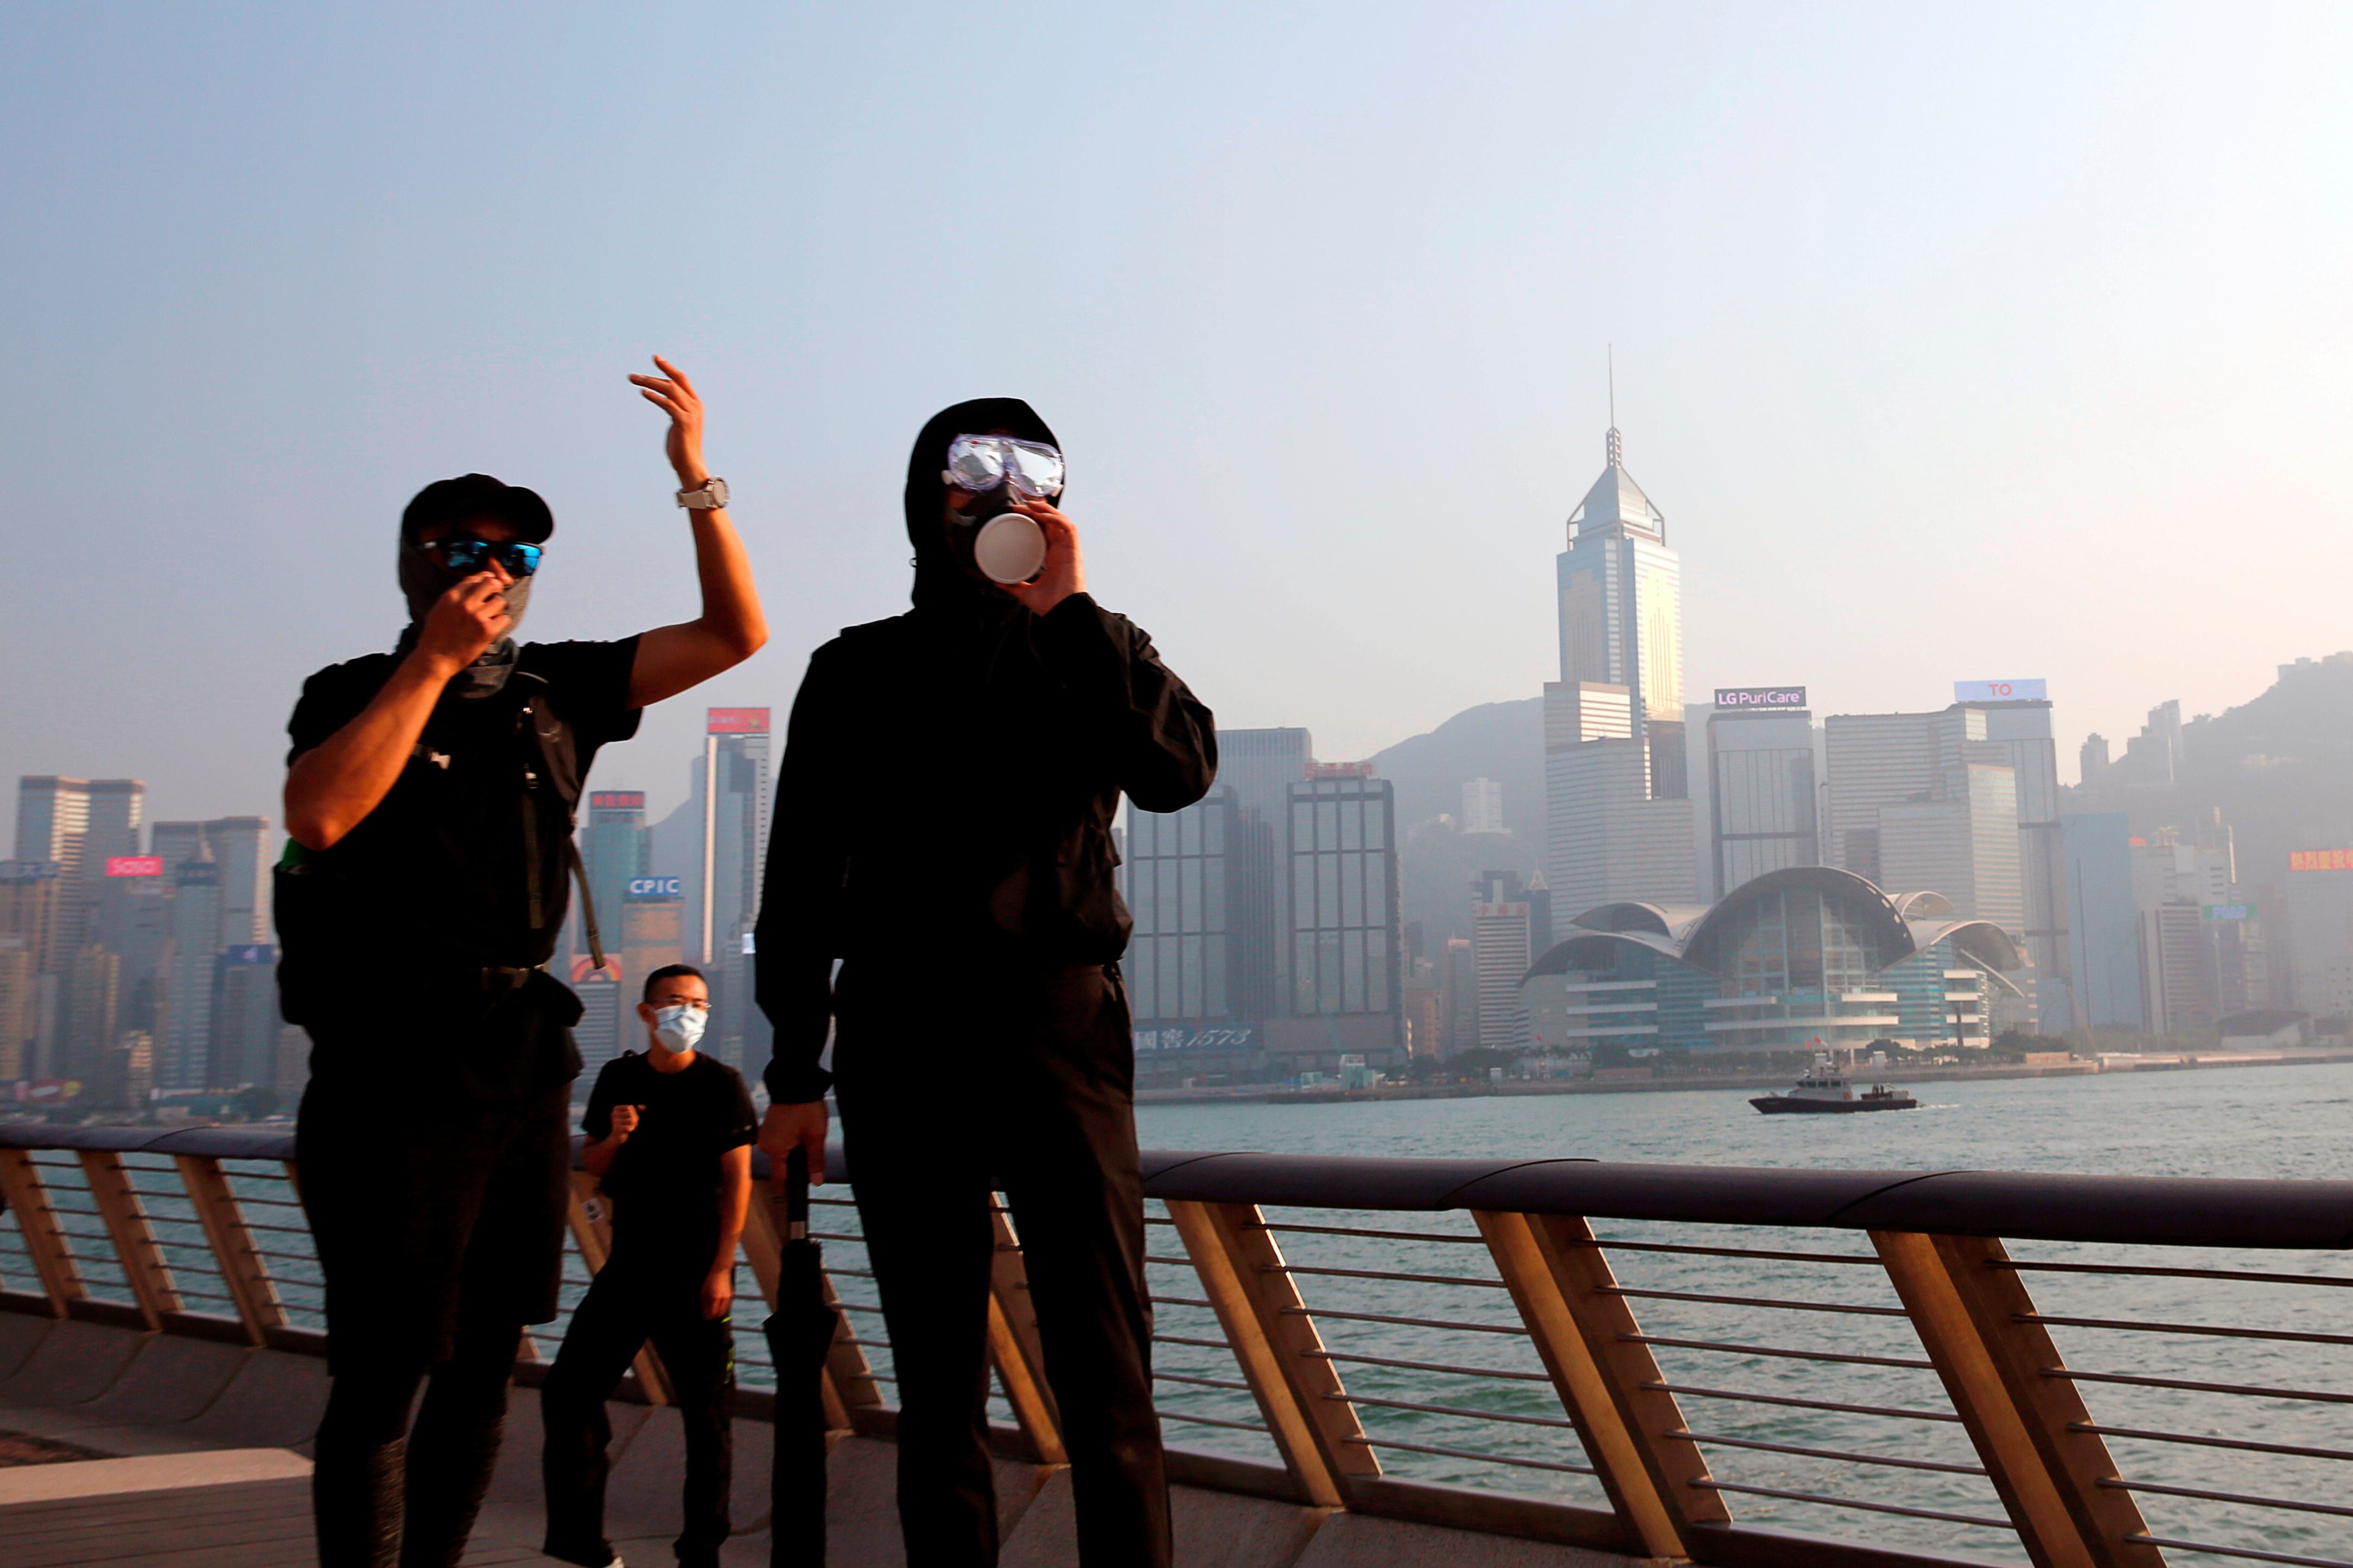 Anti-government protesters react in front of skyline building at Tsim Sha Tsui is in Hong Kong, China October 27, 2019. REUTERS/Tyrone Siu/File Photo